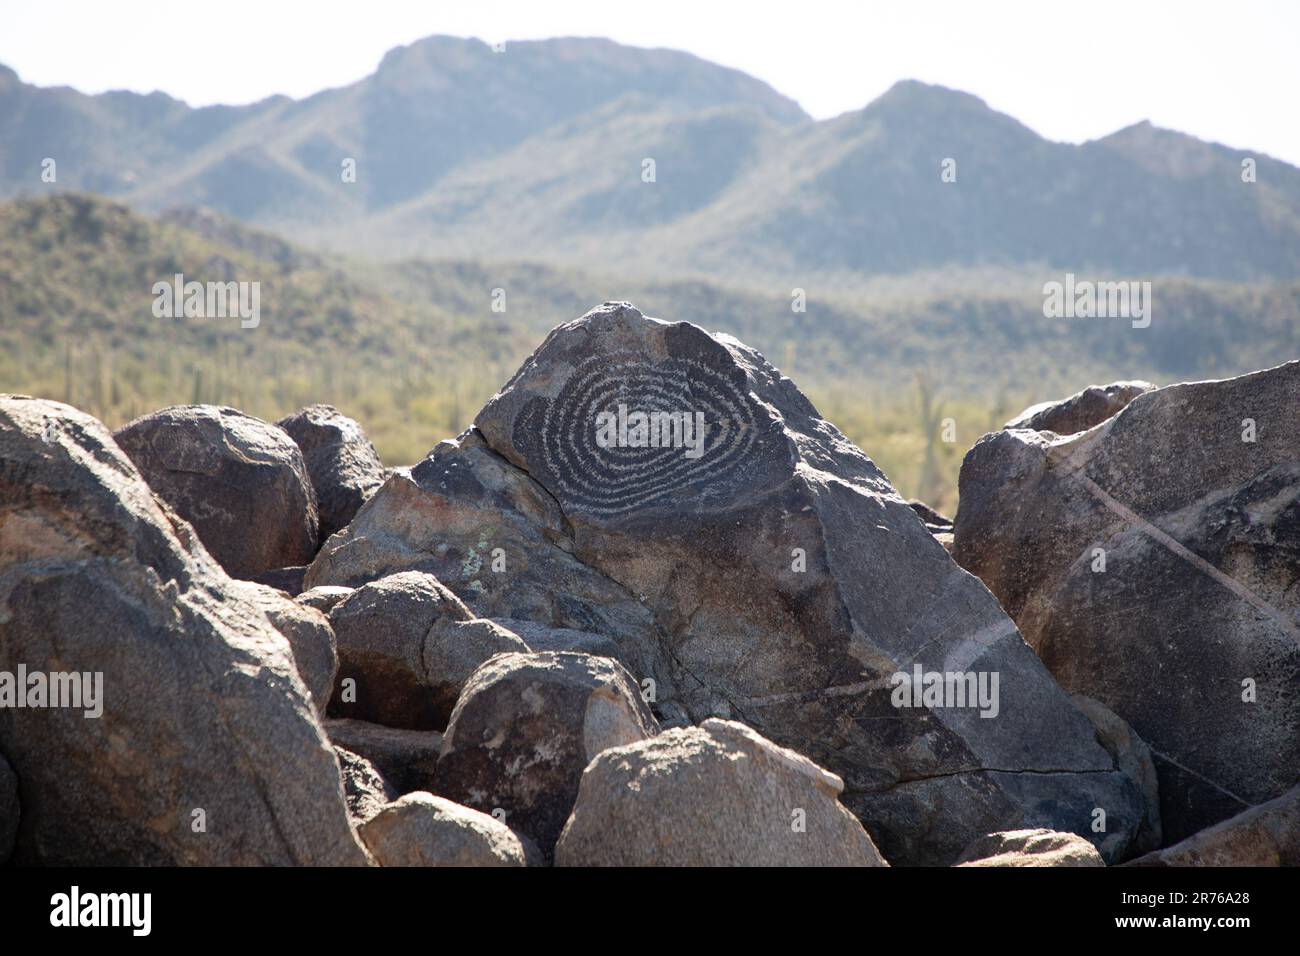 800 year old petroglyph located at the Signal Hill Petroglyph Site in the Tucson Mountain District of Saguaro National Park near Tucson, Arizona. Stock Photo